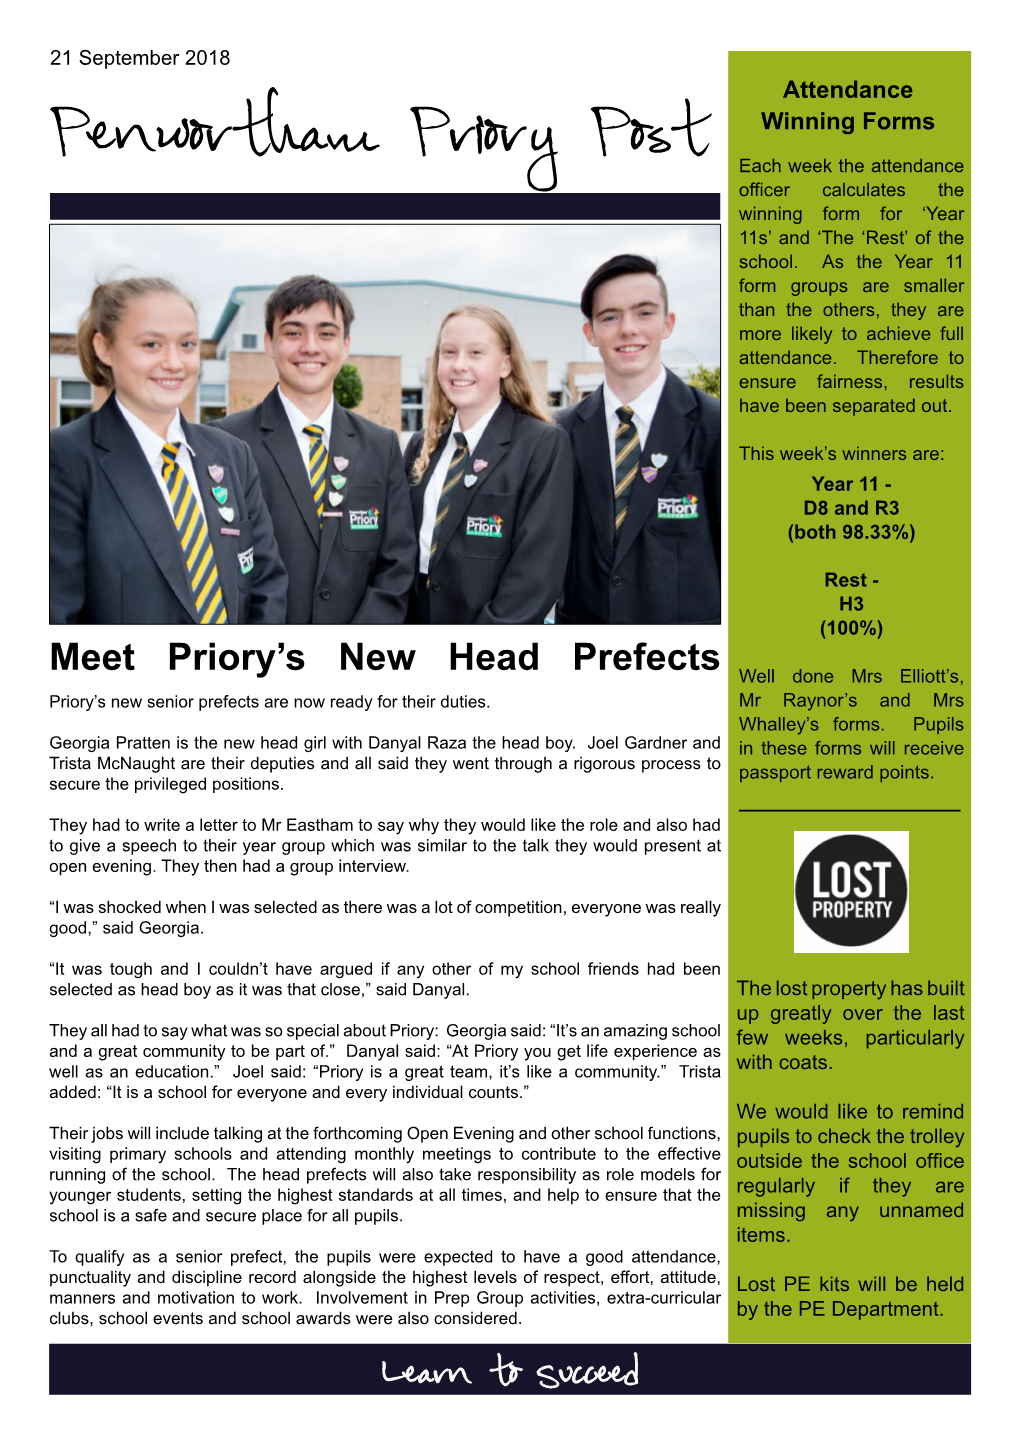 Penwortham Priory Post Winning Form for ‘Year 11S’ and ‘The ‘Rest’ of the School